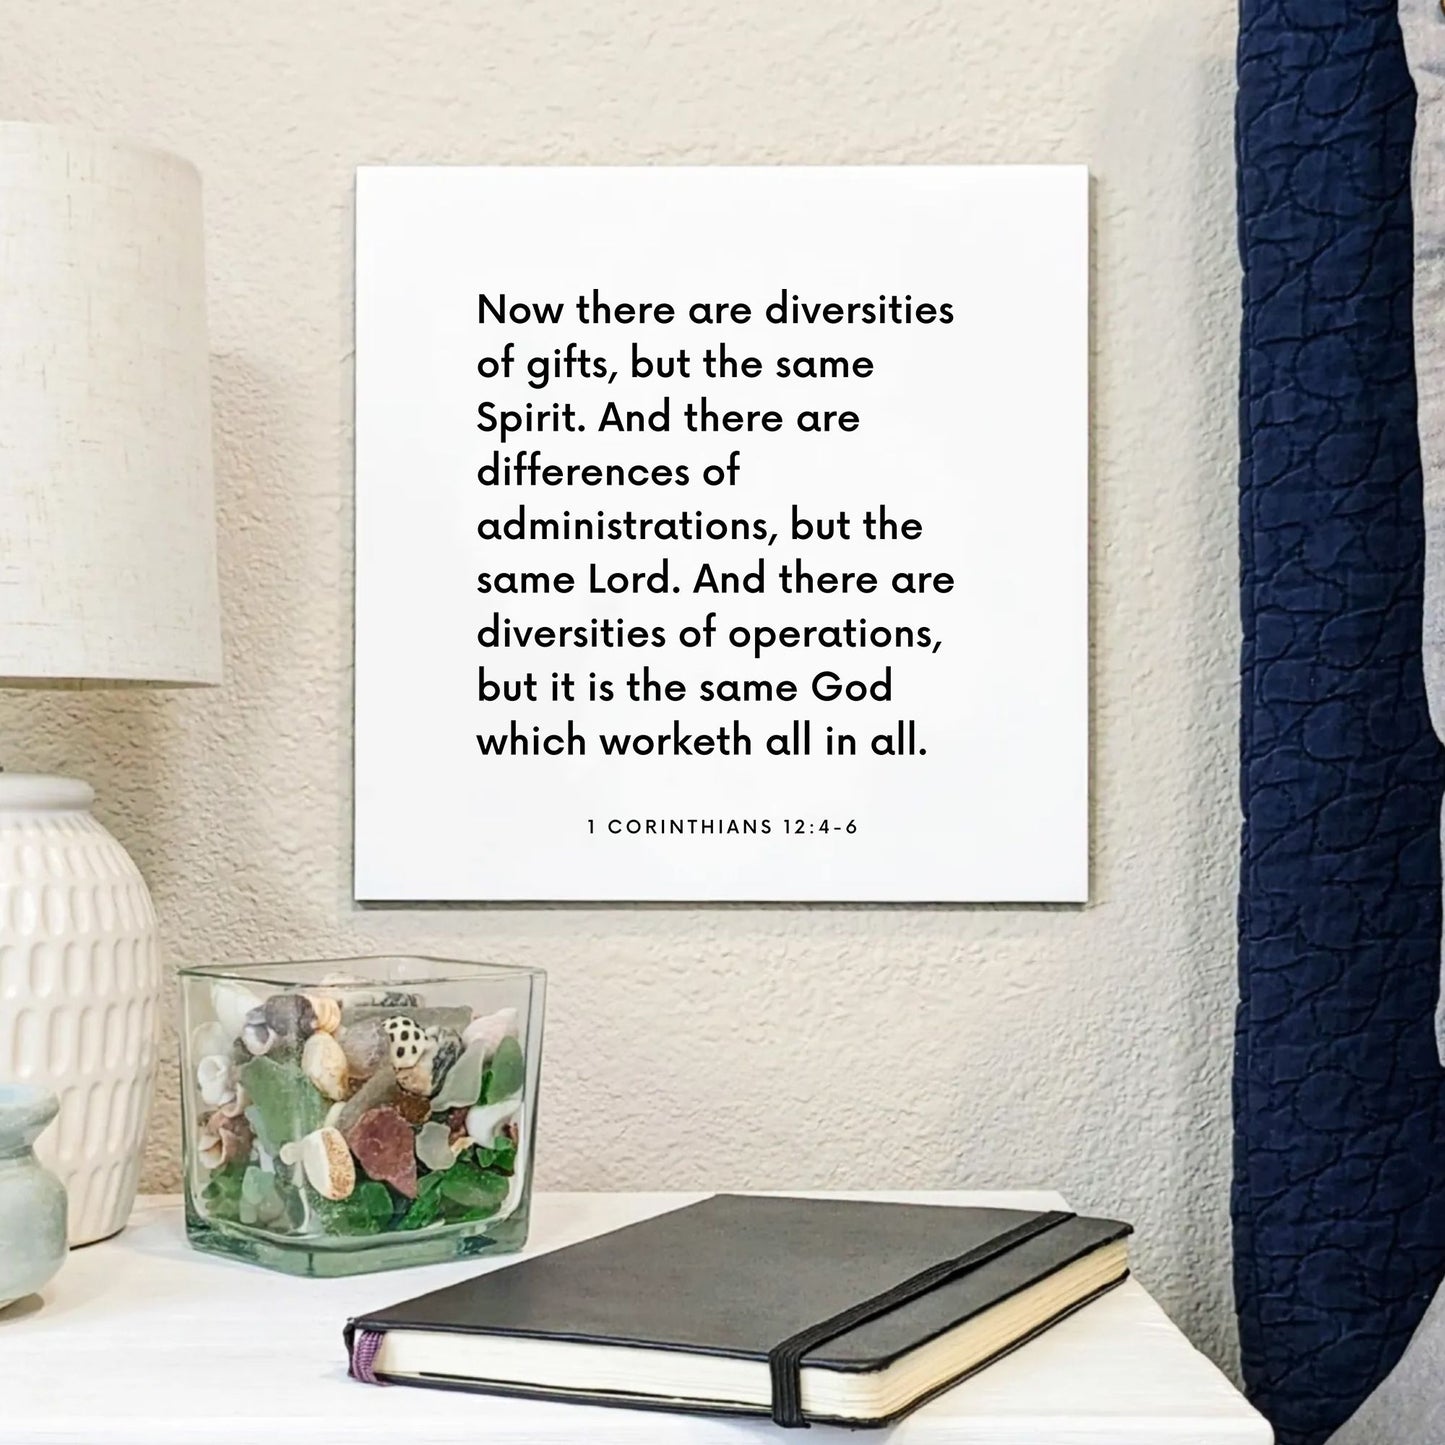 Bedside mouting of the scripture tile for 1 Corinthians 12:4-6 - "There are diversities of gifts, but the same Spirit"